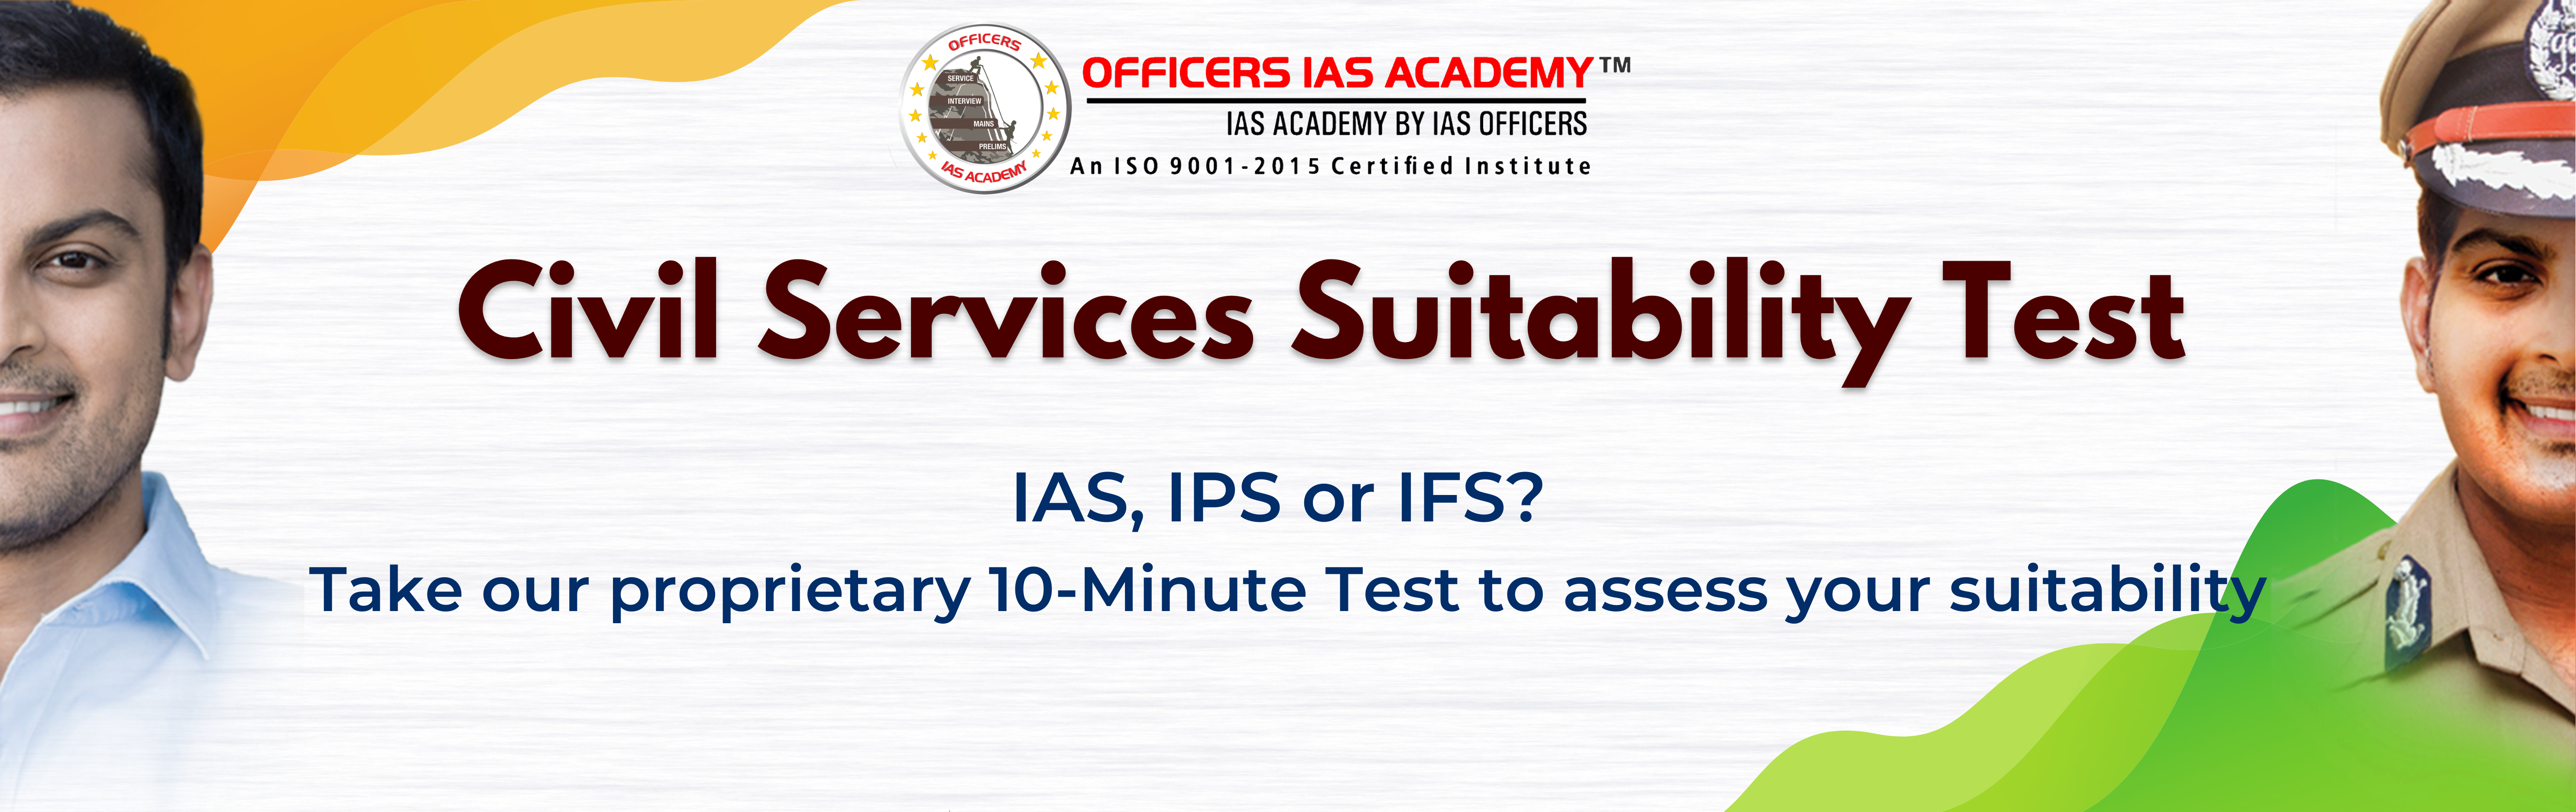 Officers IAS Accademy